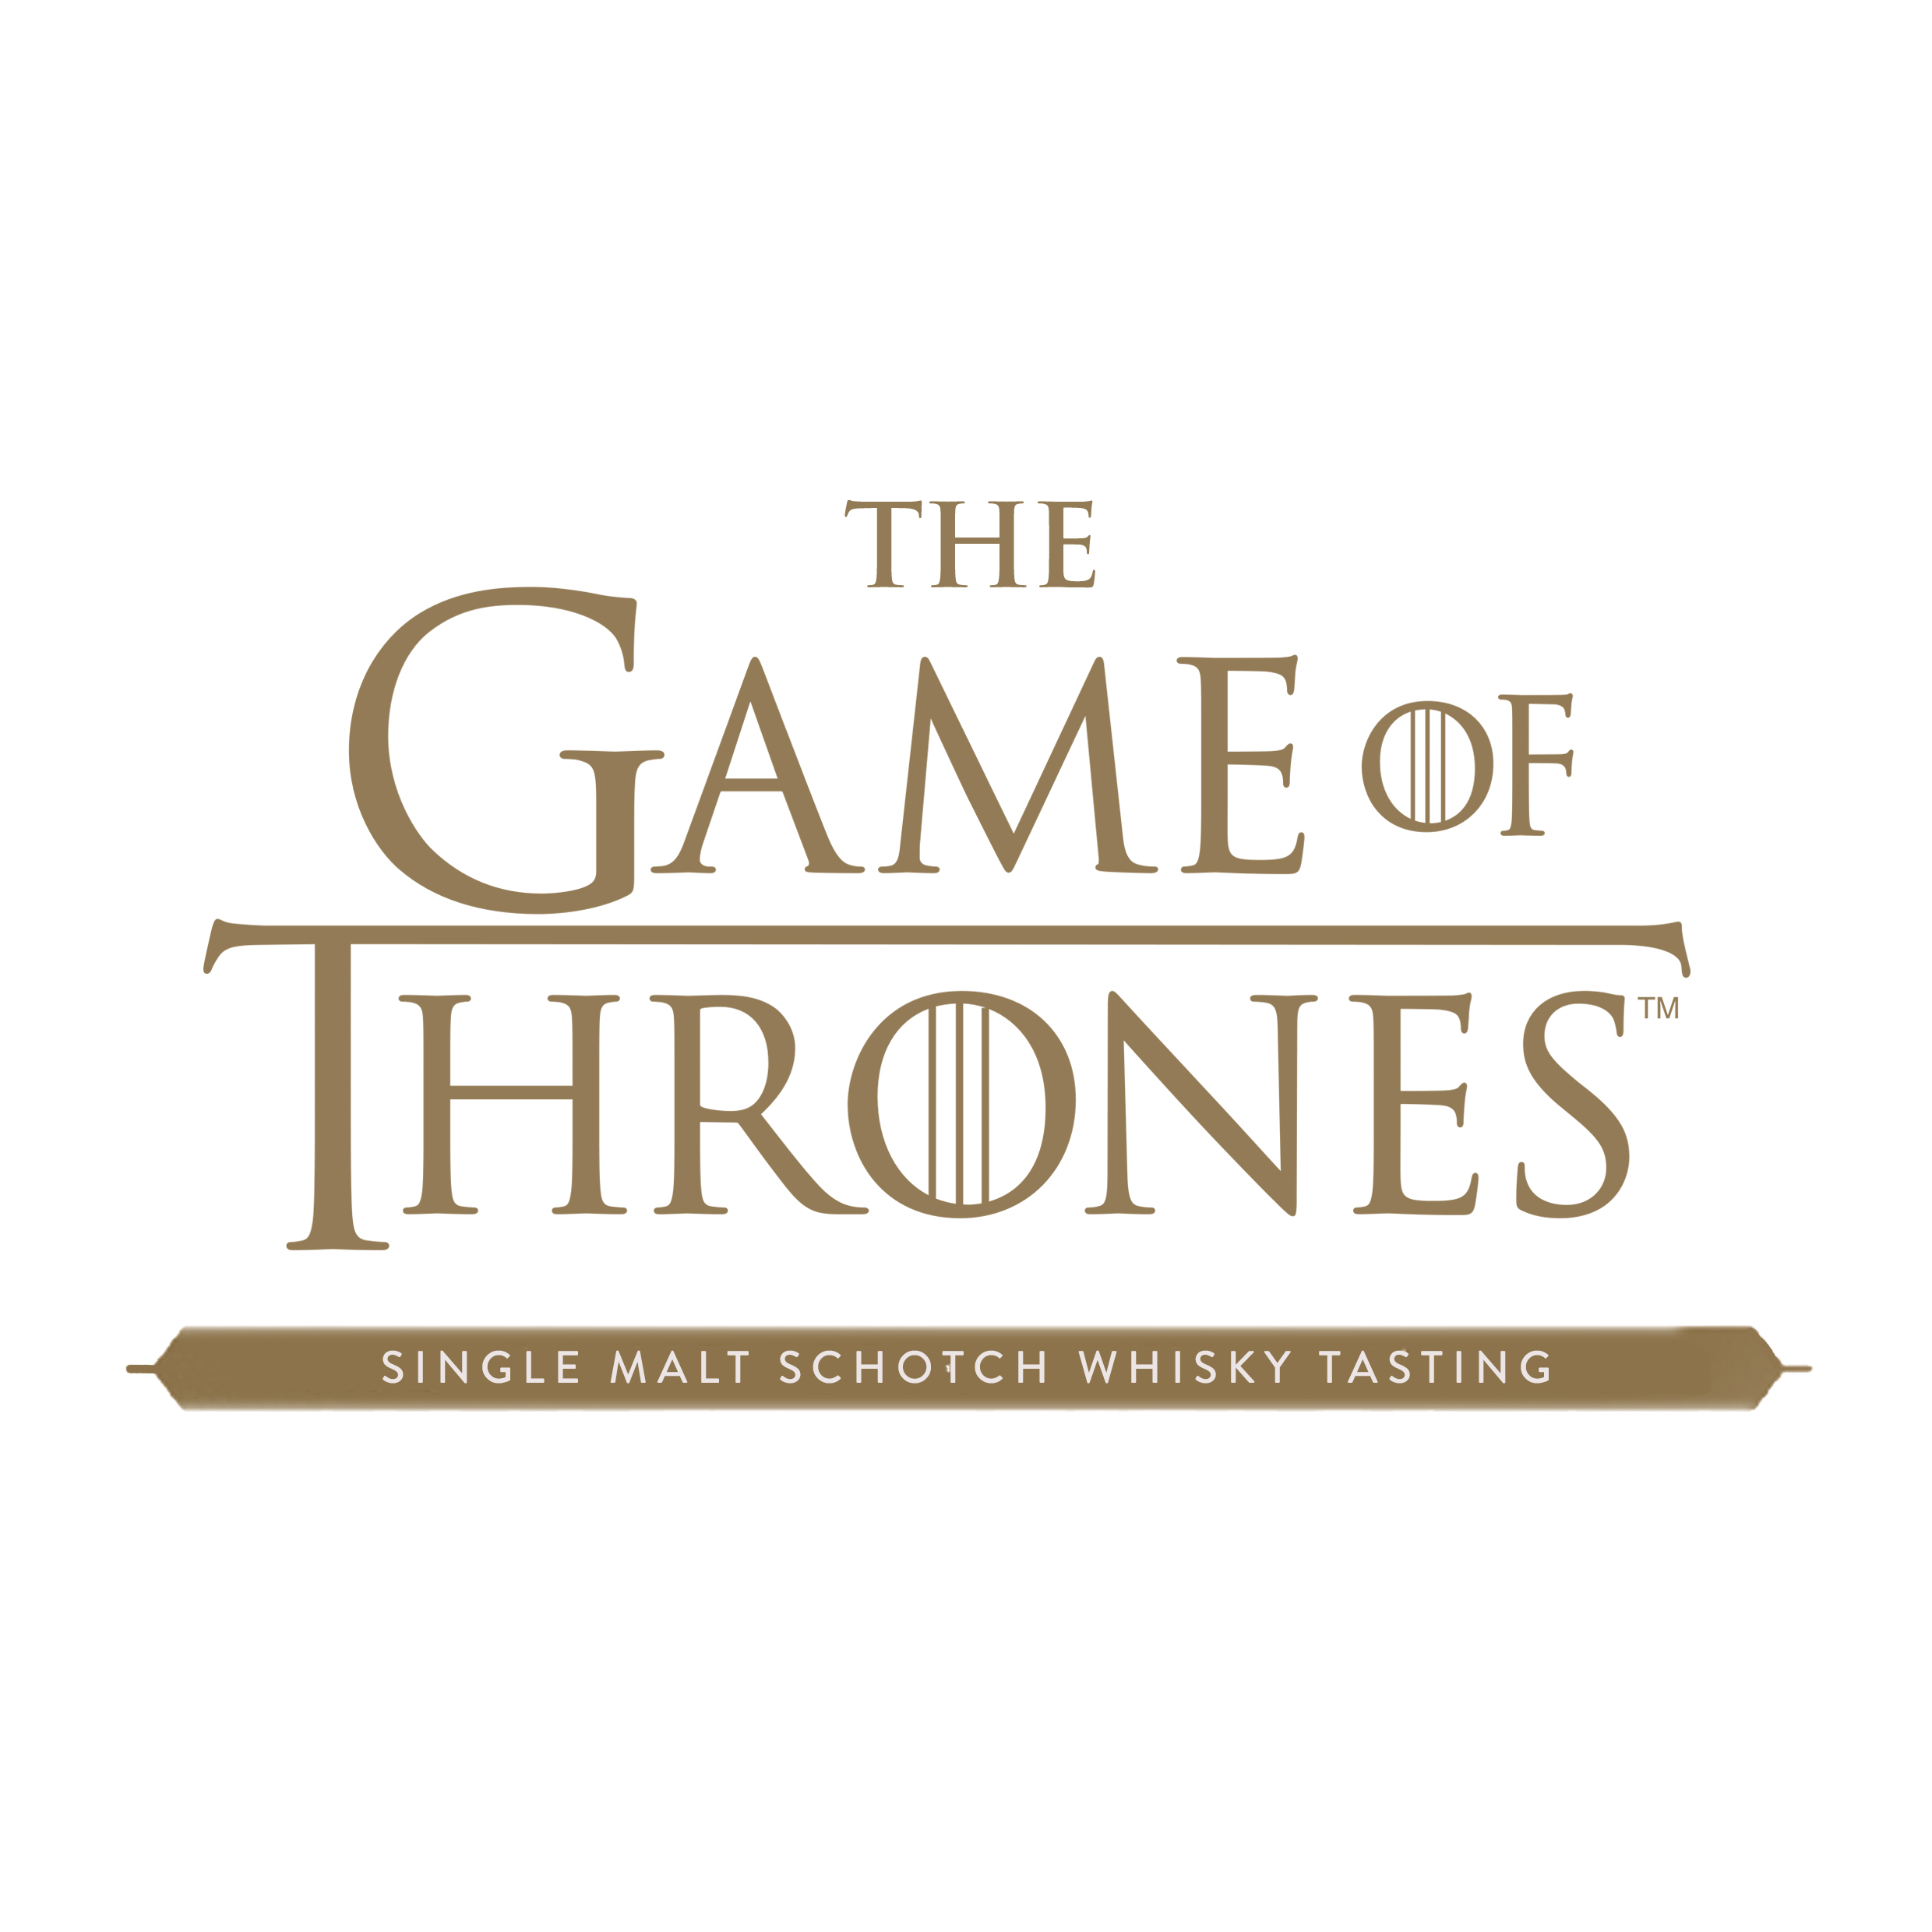 Best Of Whiskies - Game of Thrones whisky tasting with Hans Offringa NV